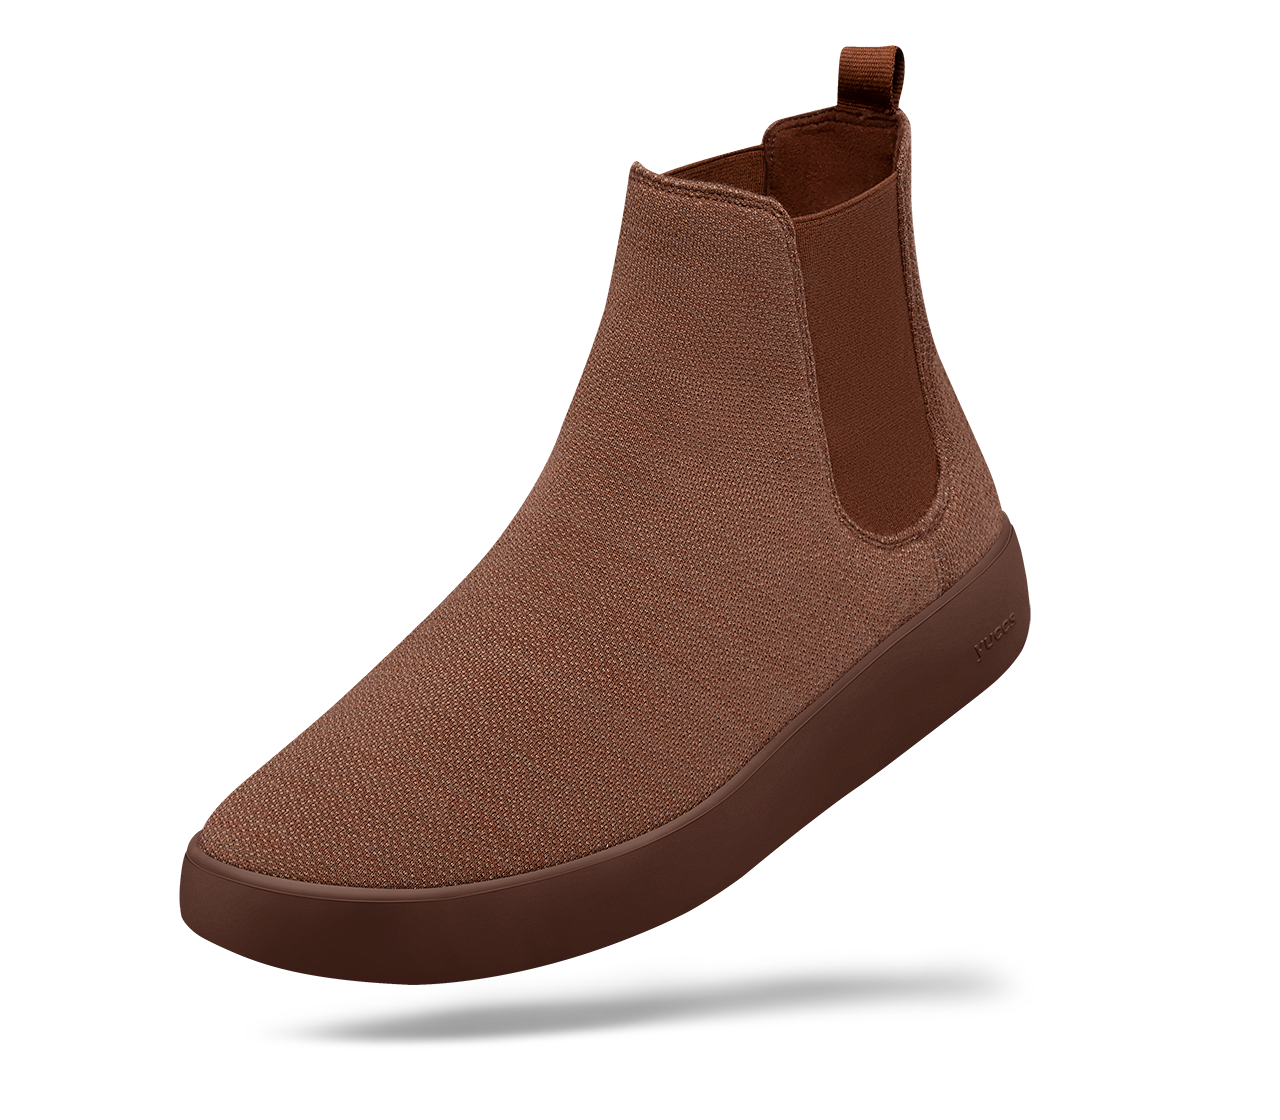 Merino Chelsea Boot WP Outlet Hombre